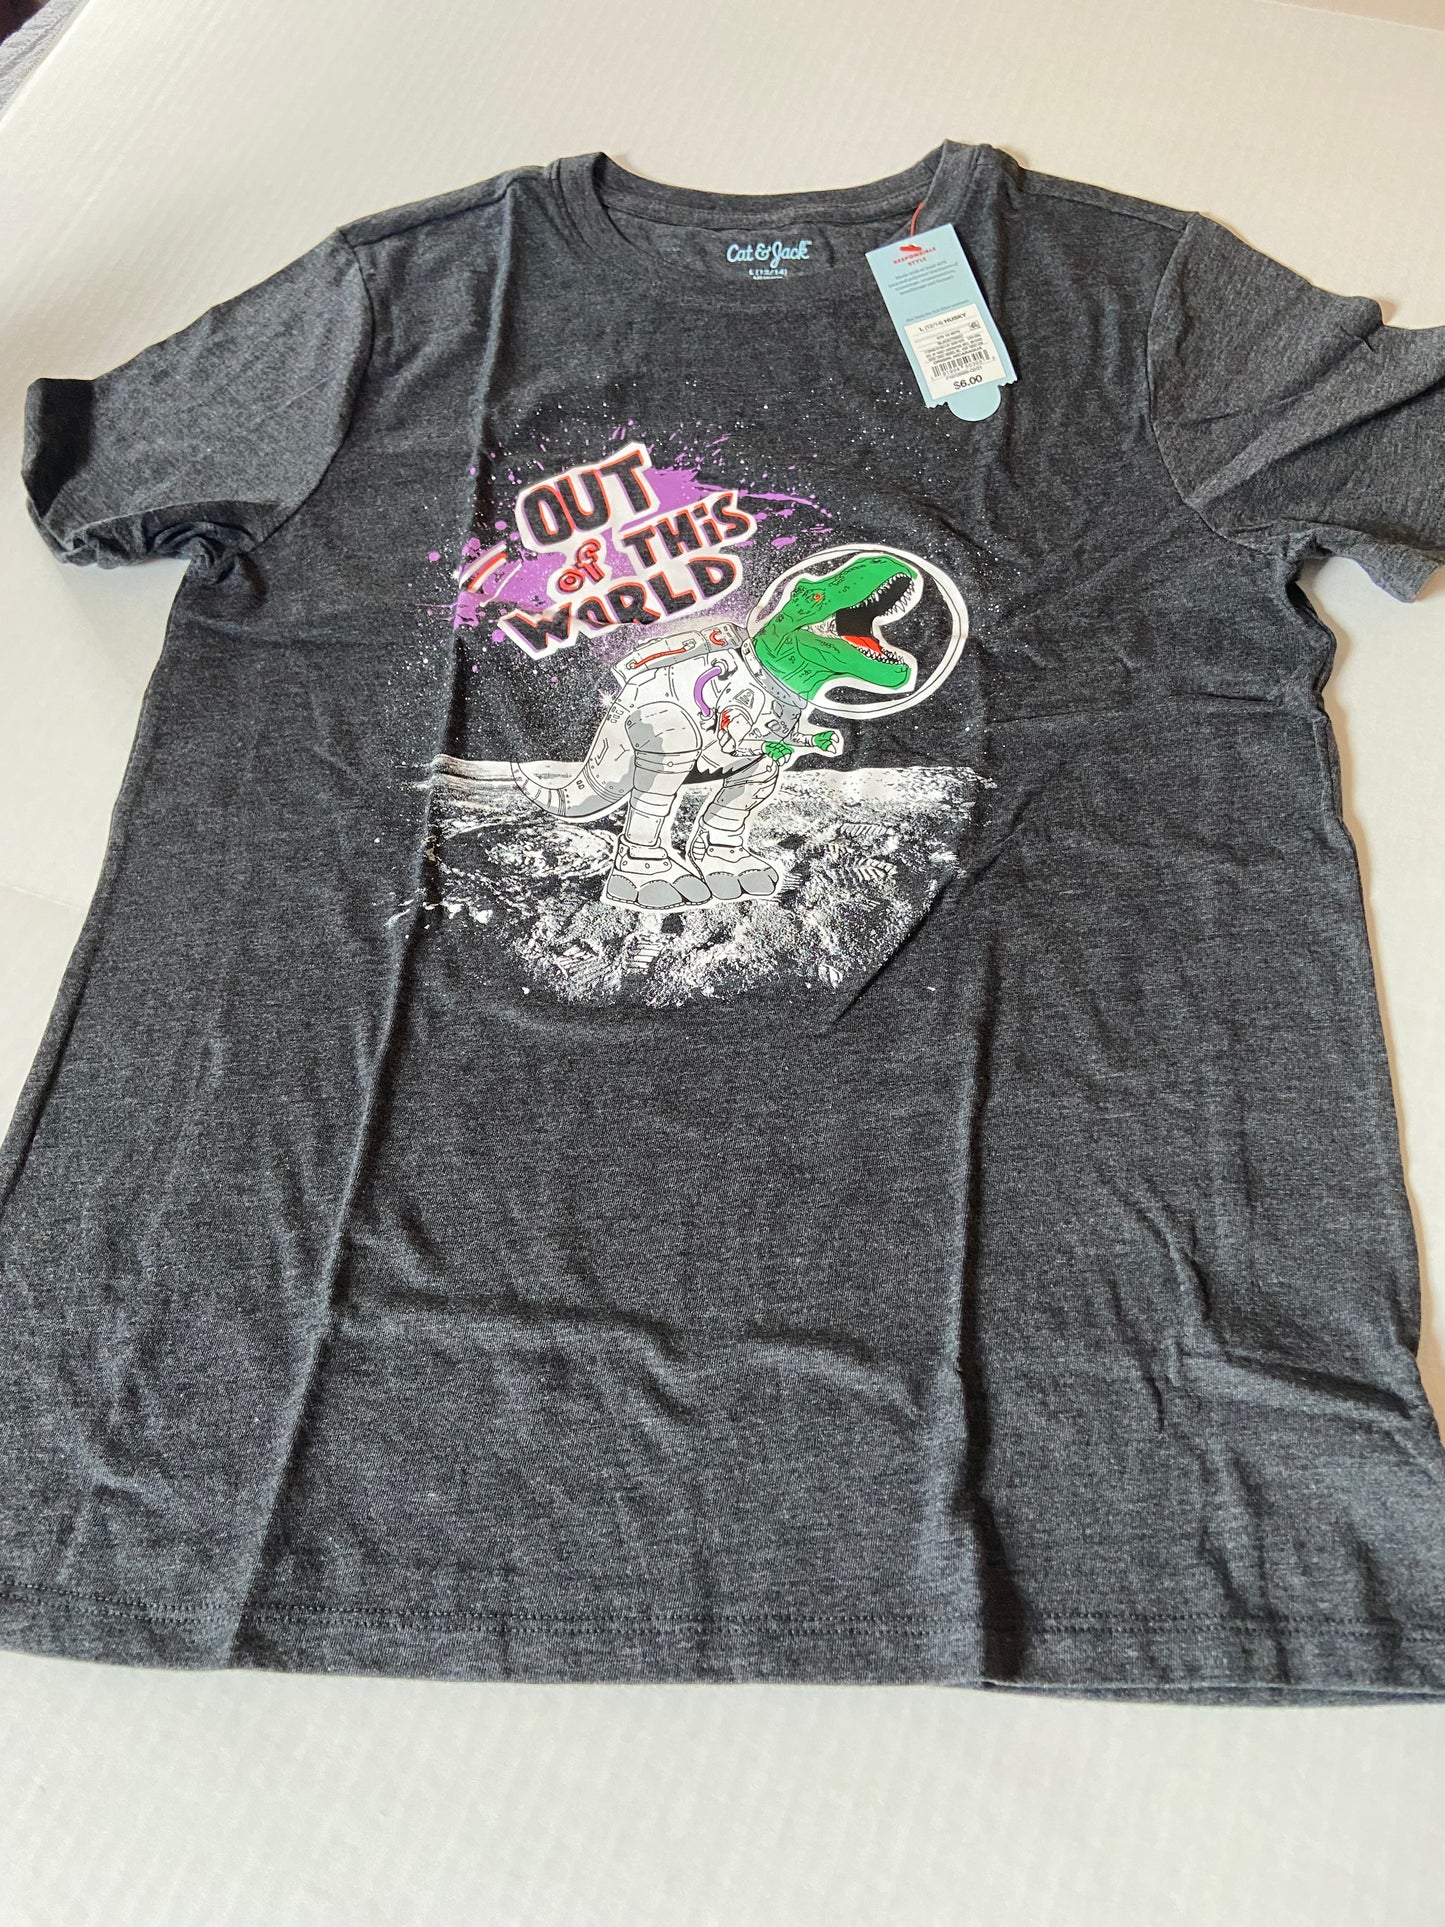 NWT, Cat & Jack Out of this World Dino shirt, size Large xxl 18